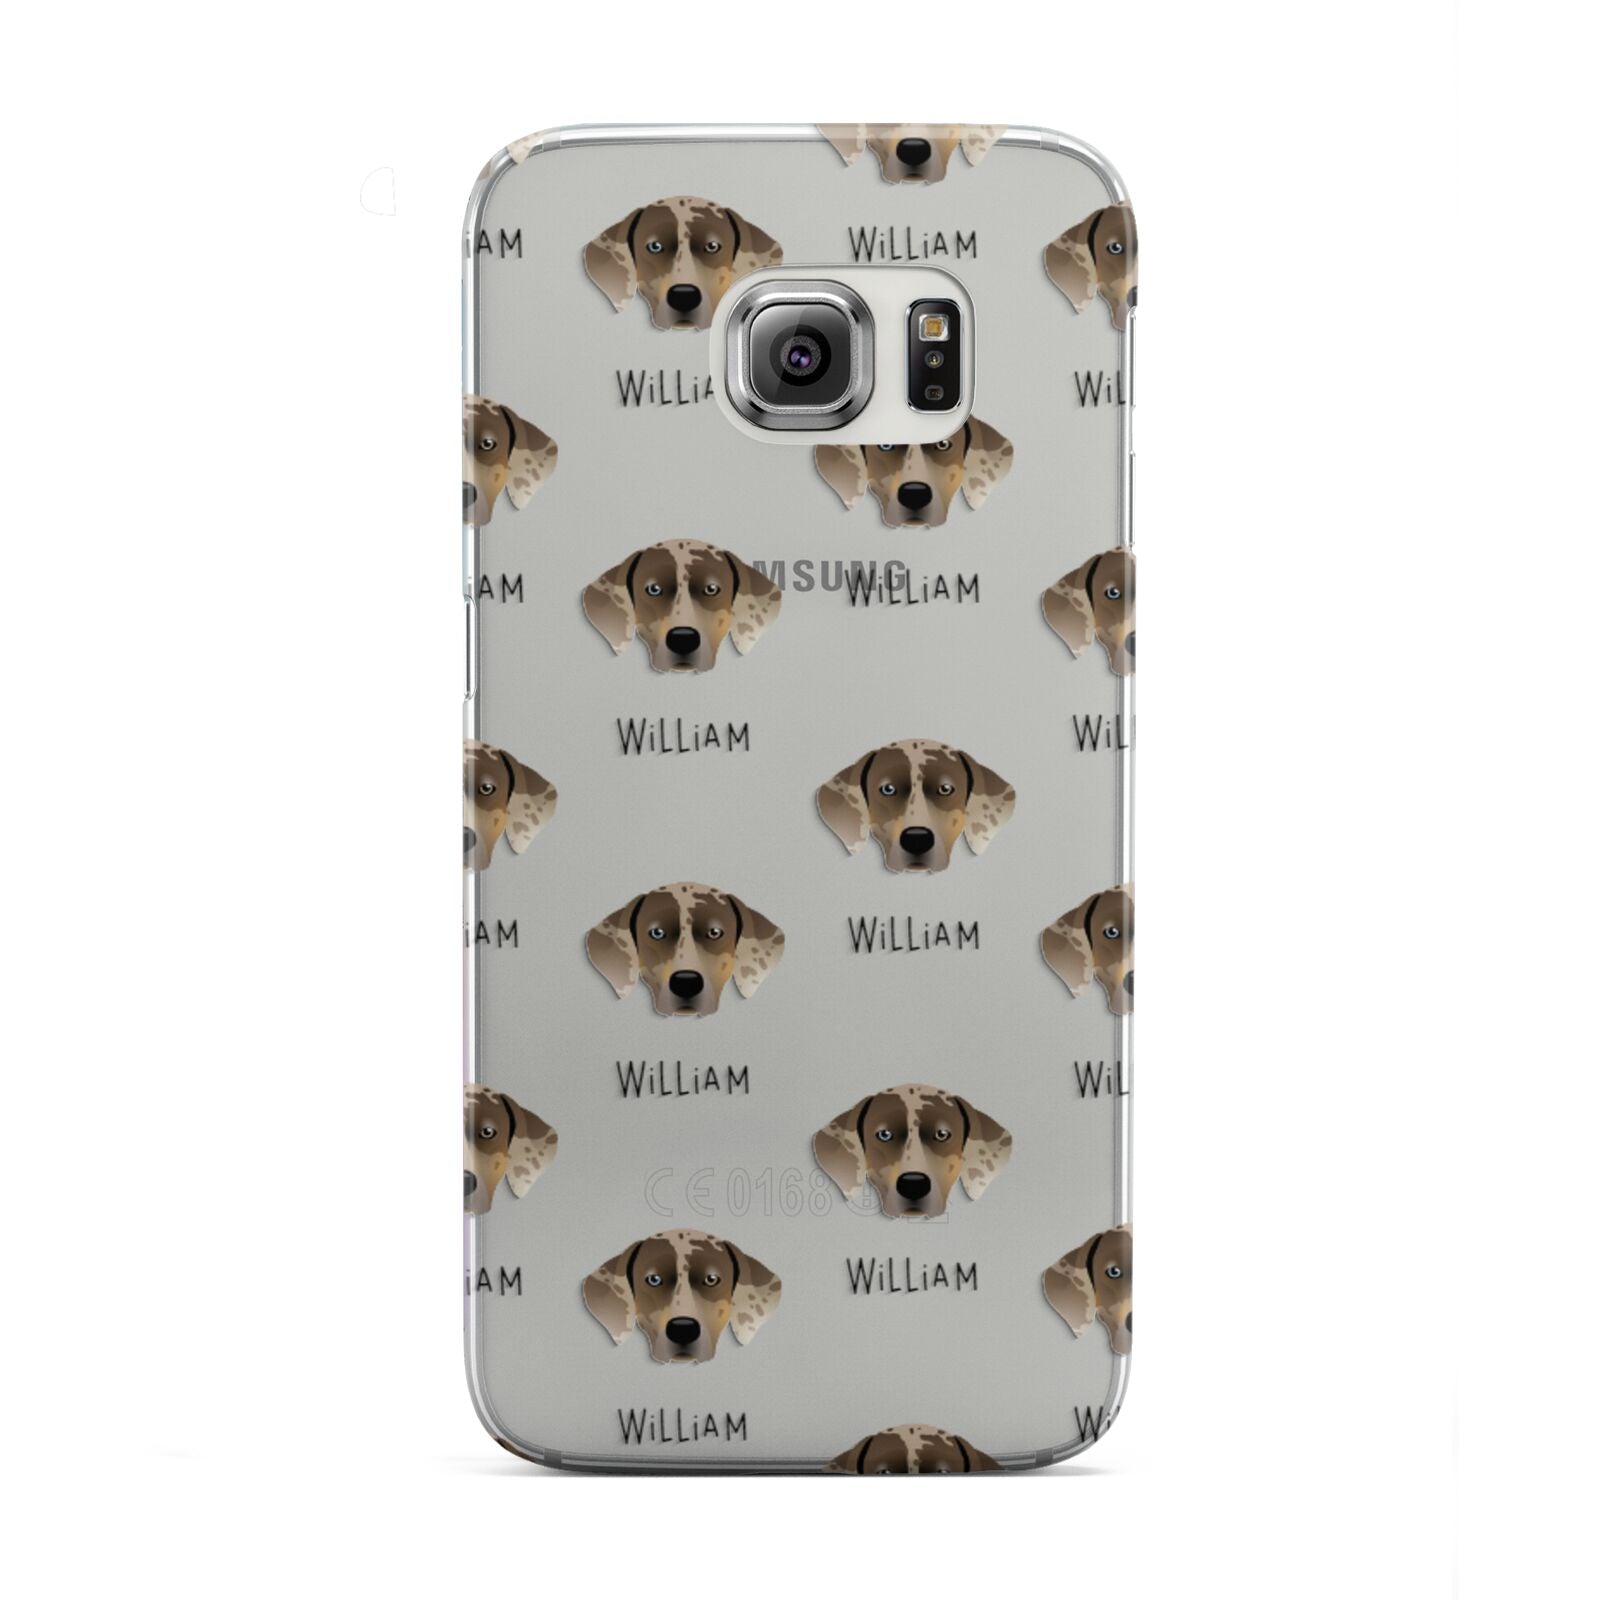 Catahoula Leopard Dog Icon with Name Samsung Galaxy S6 Edge Case